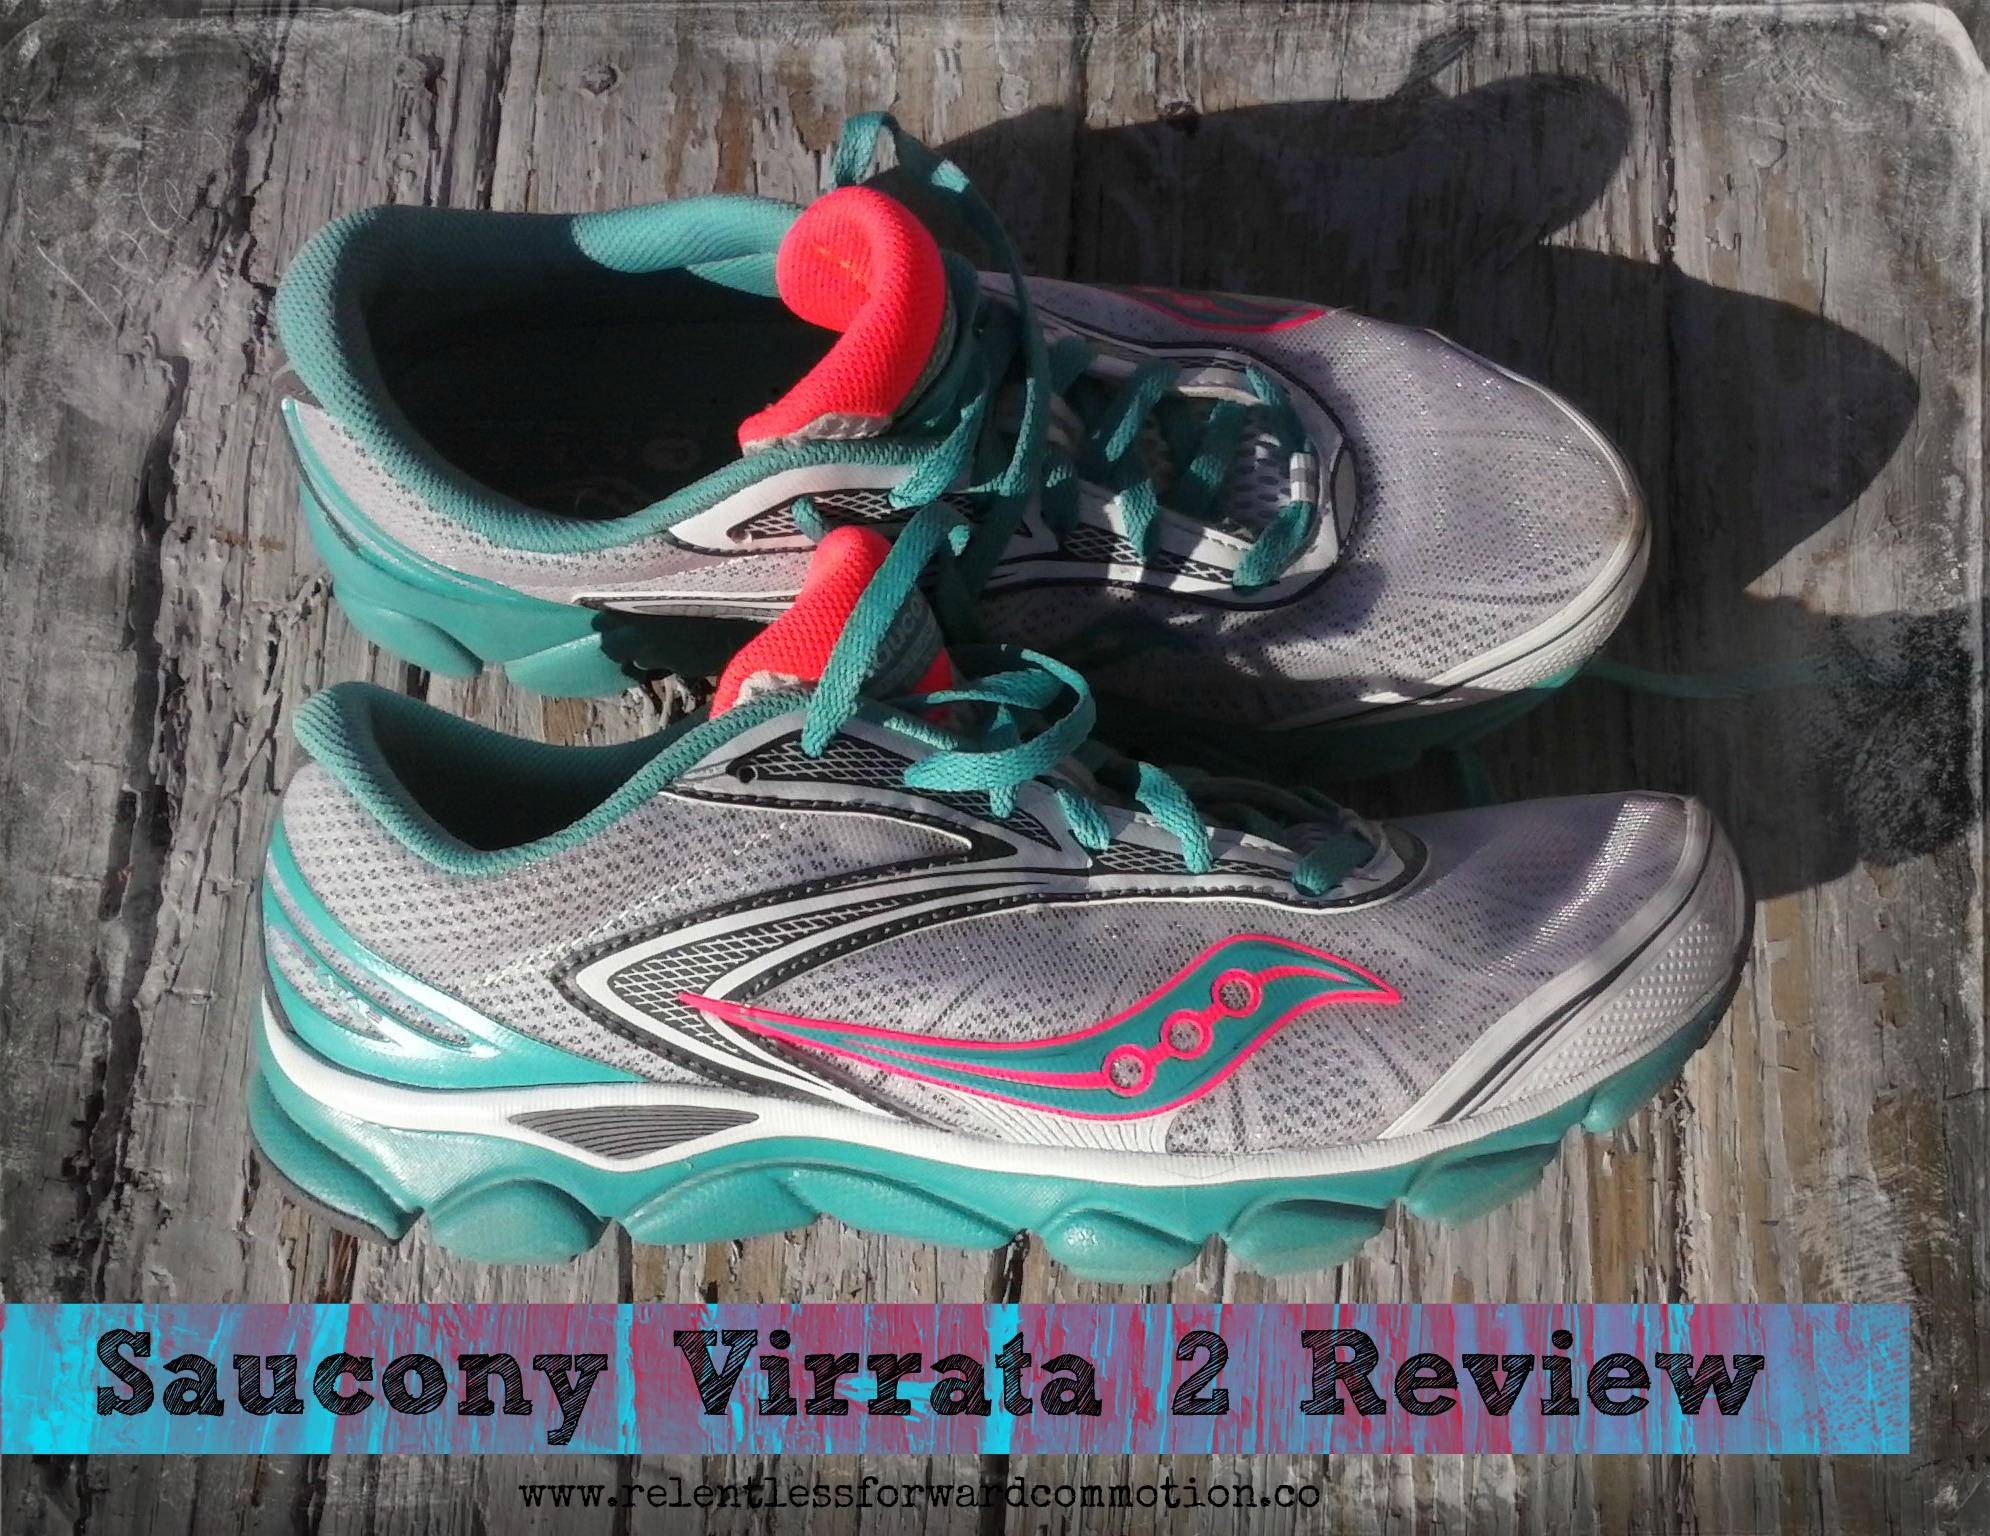 saucony virrata 2 women's running shoes review